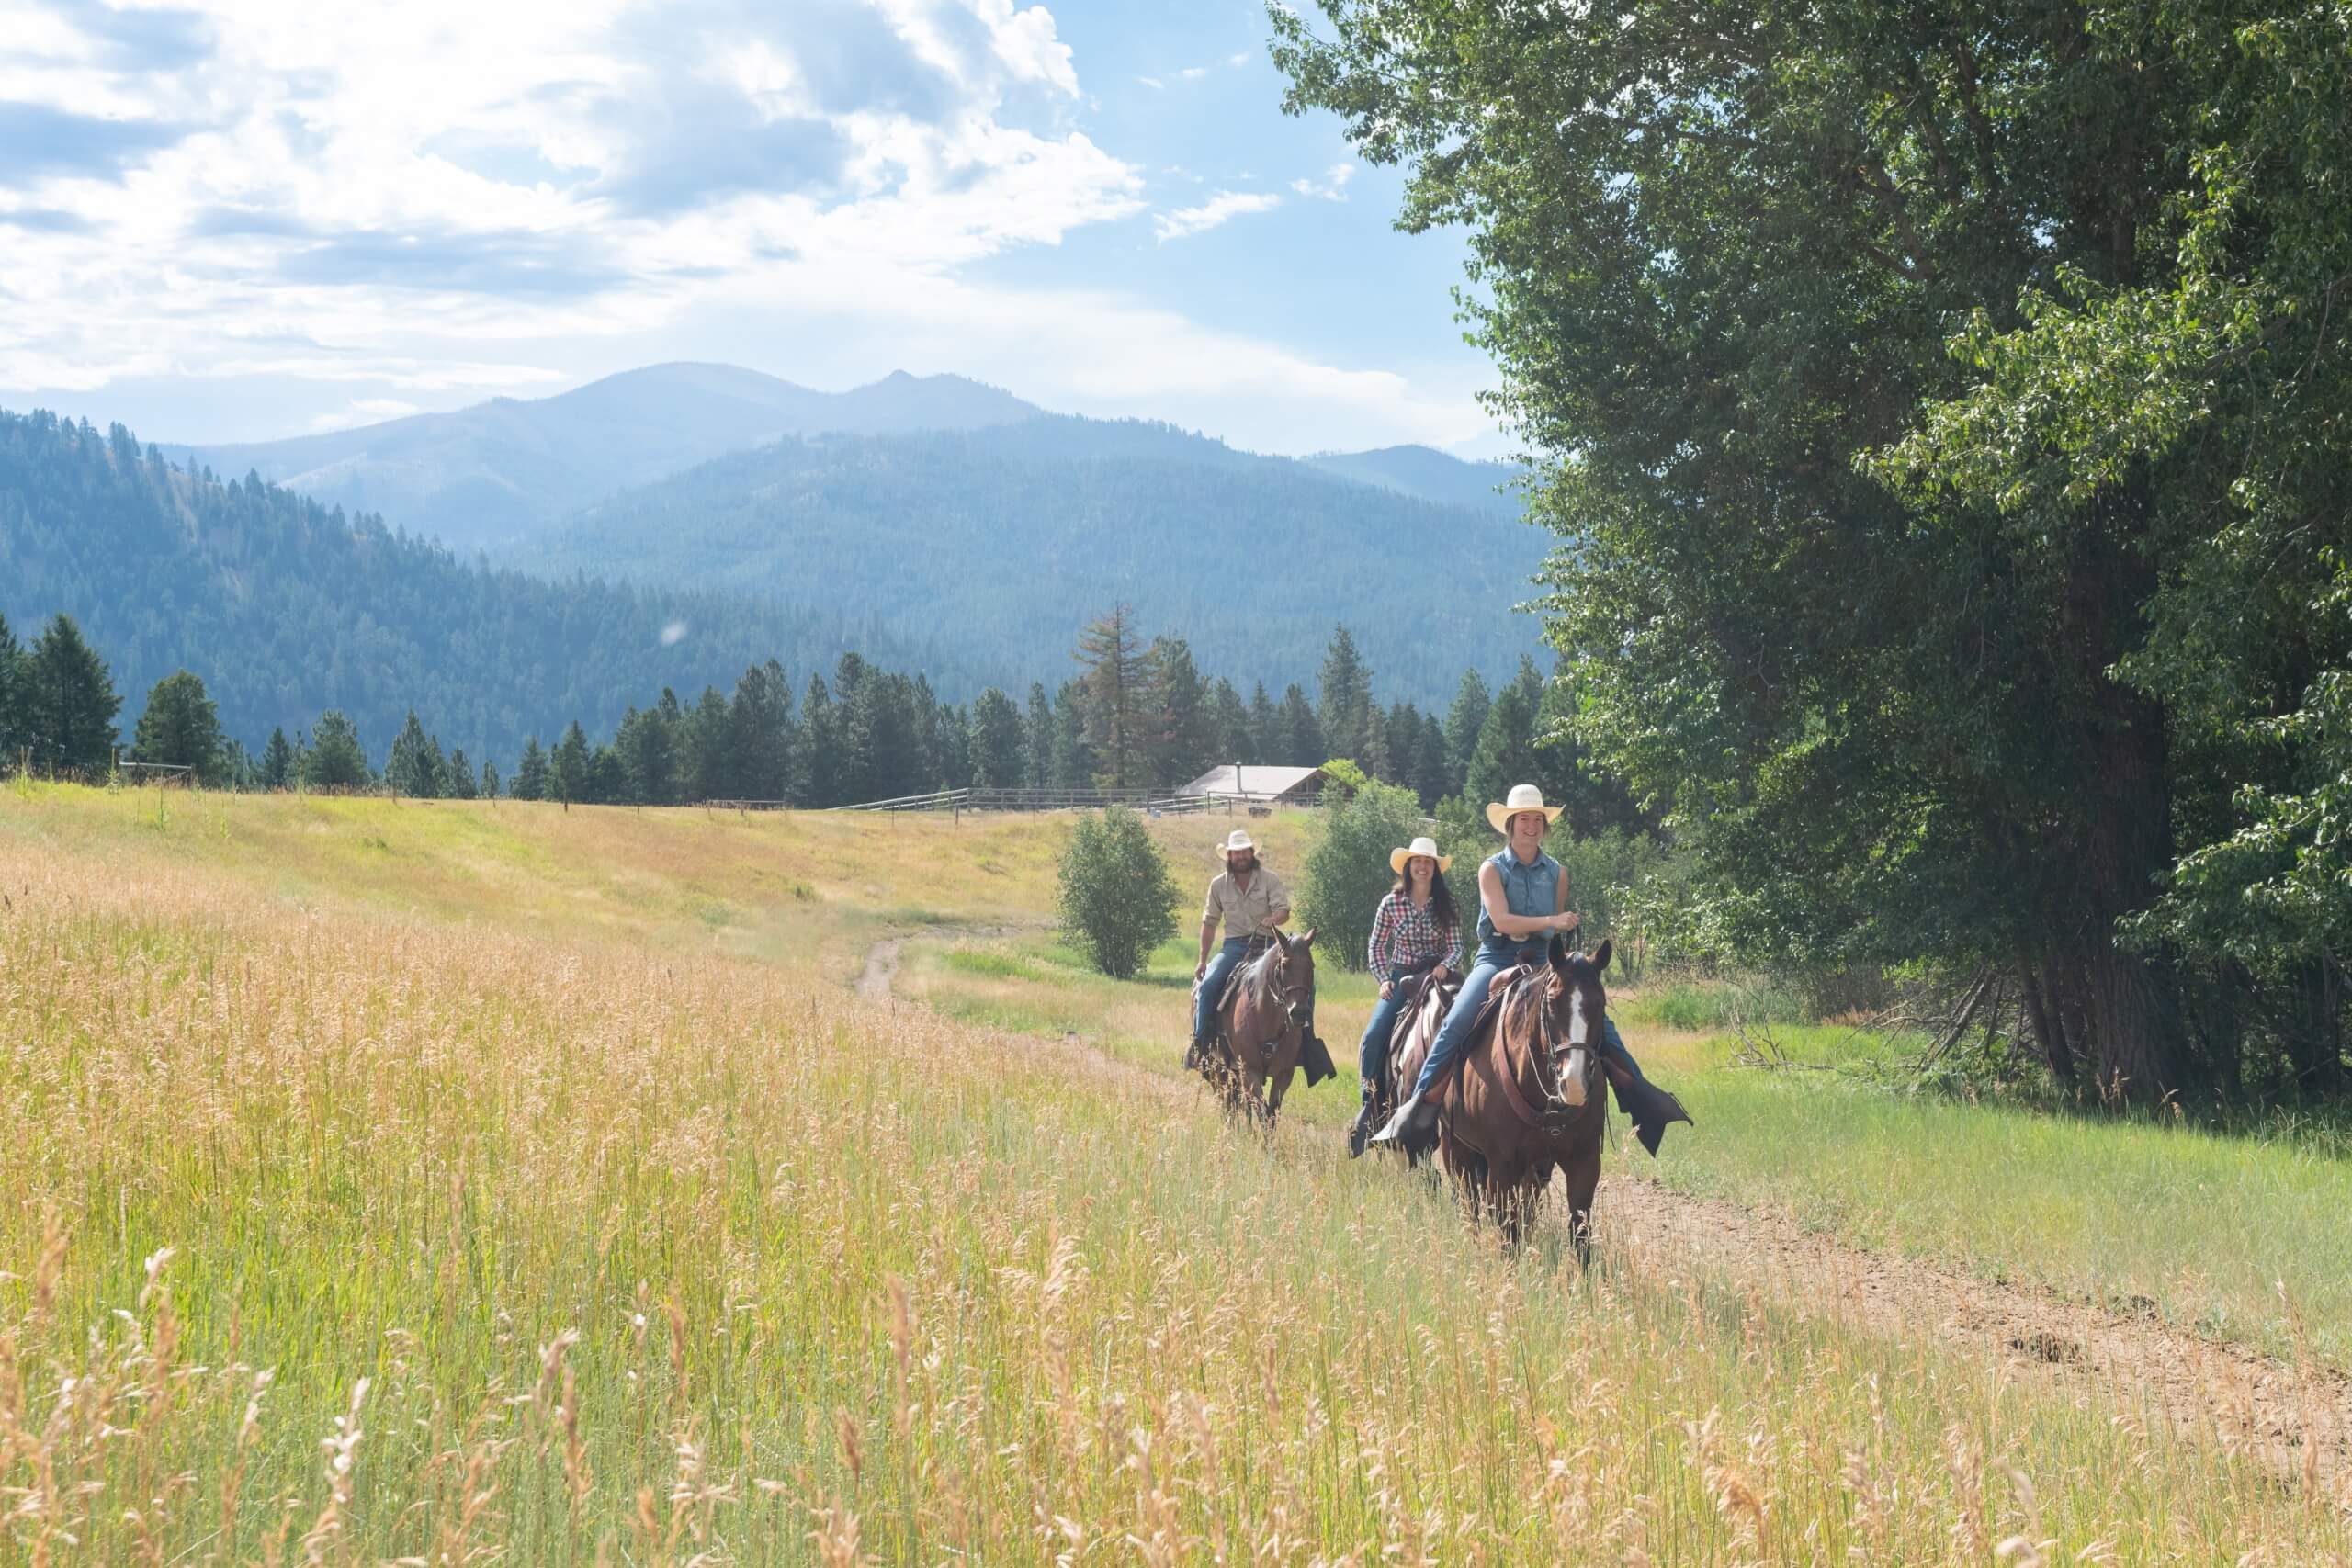 Guests horseback riding through the forest with mountain views.